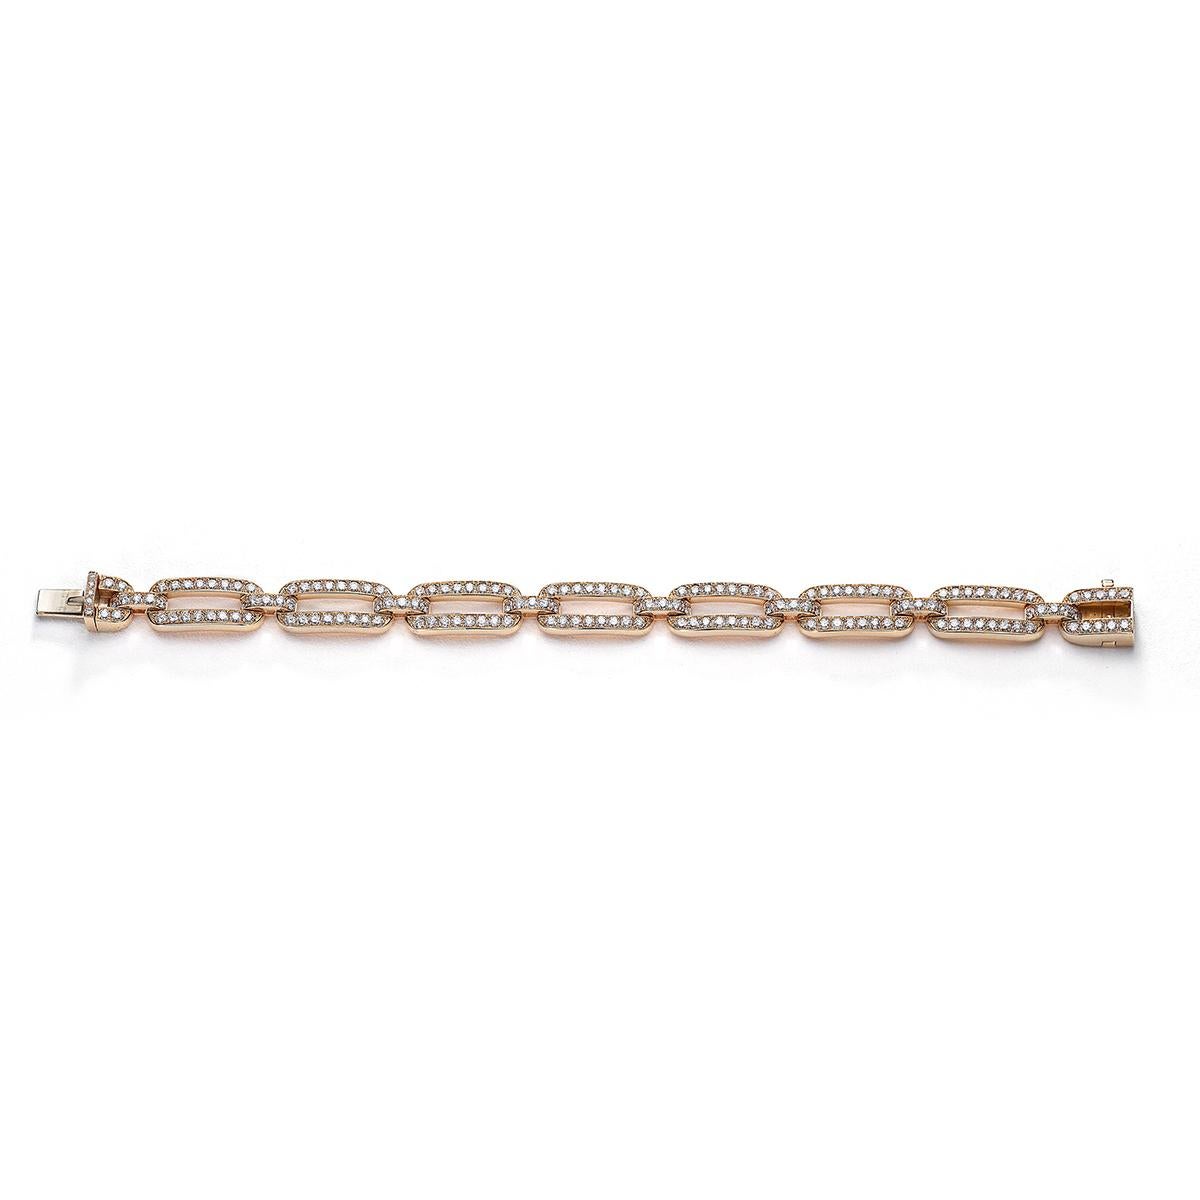 Bracelet in 18kt pink gold set with 171 diamonds 4.99 cts